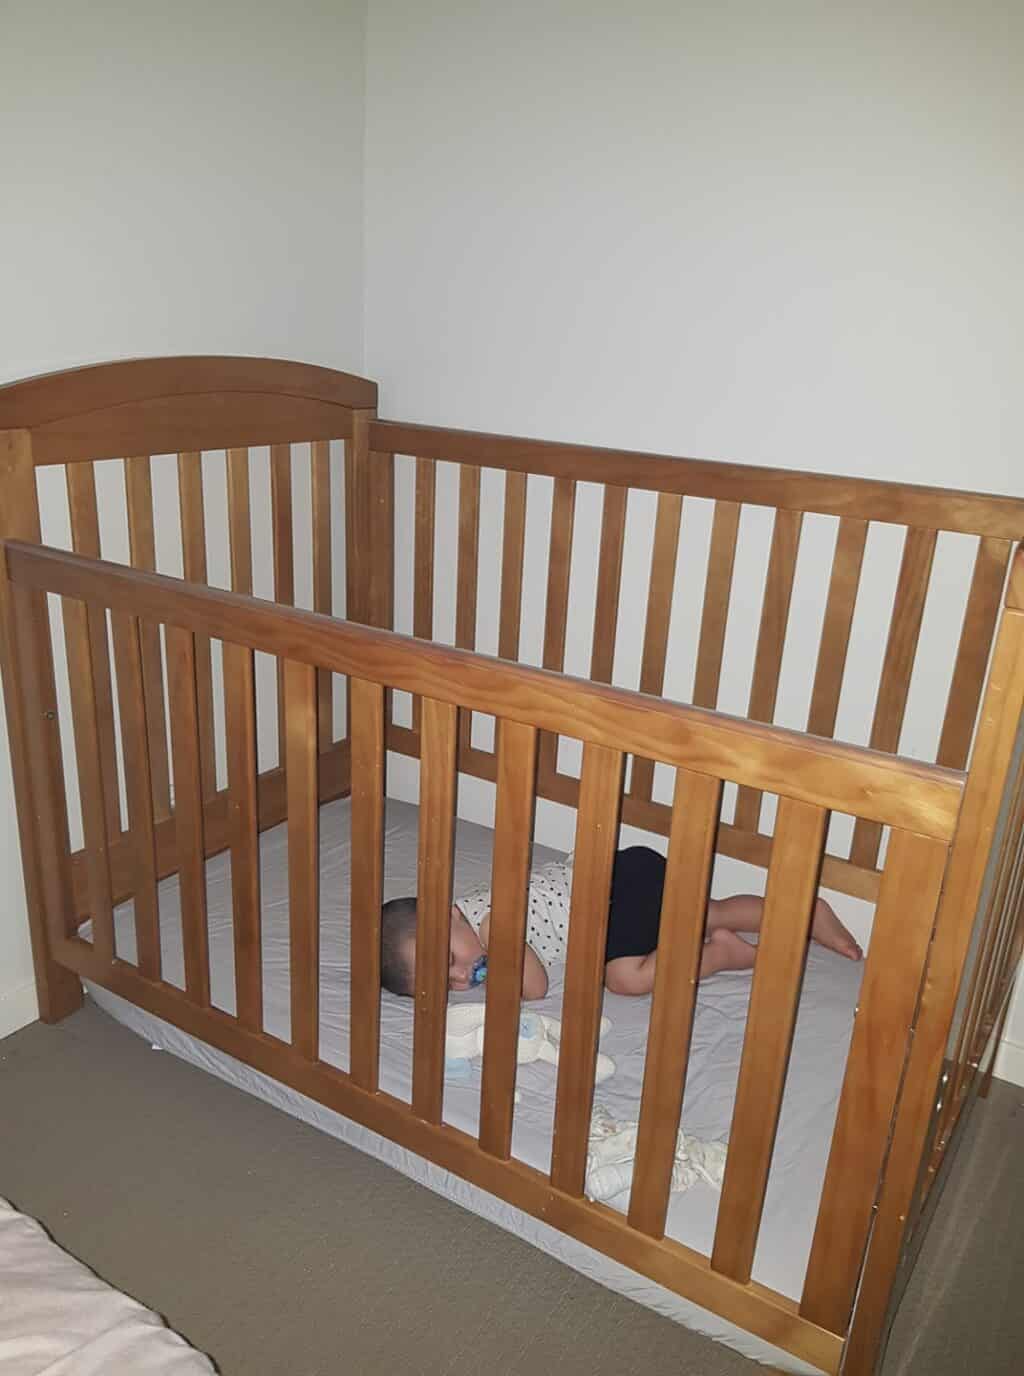 crib mattress lowered so baby can't climb out and over